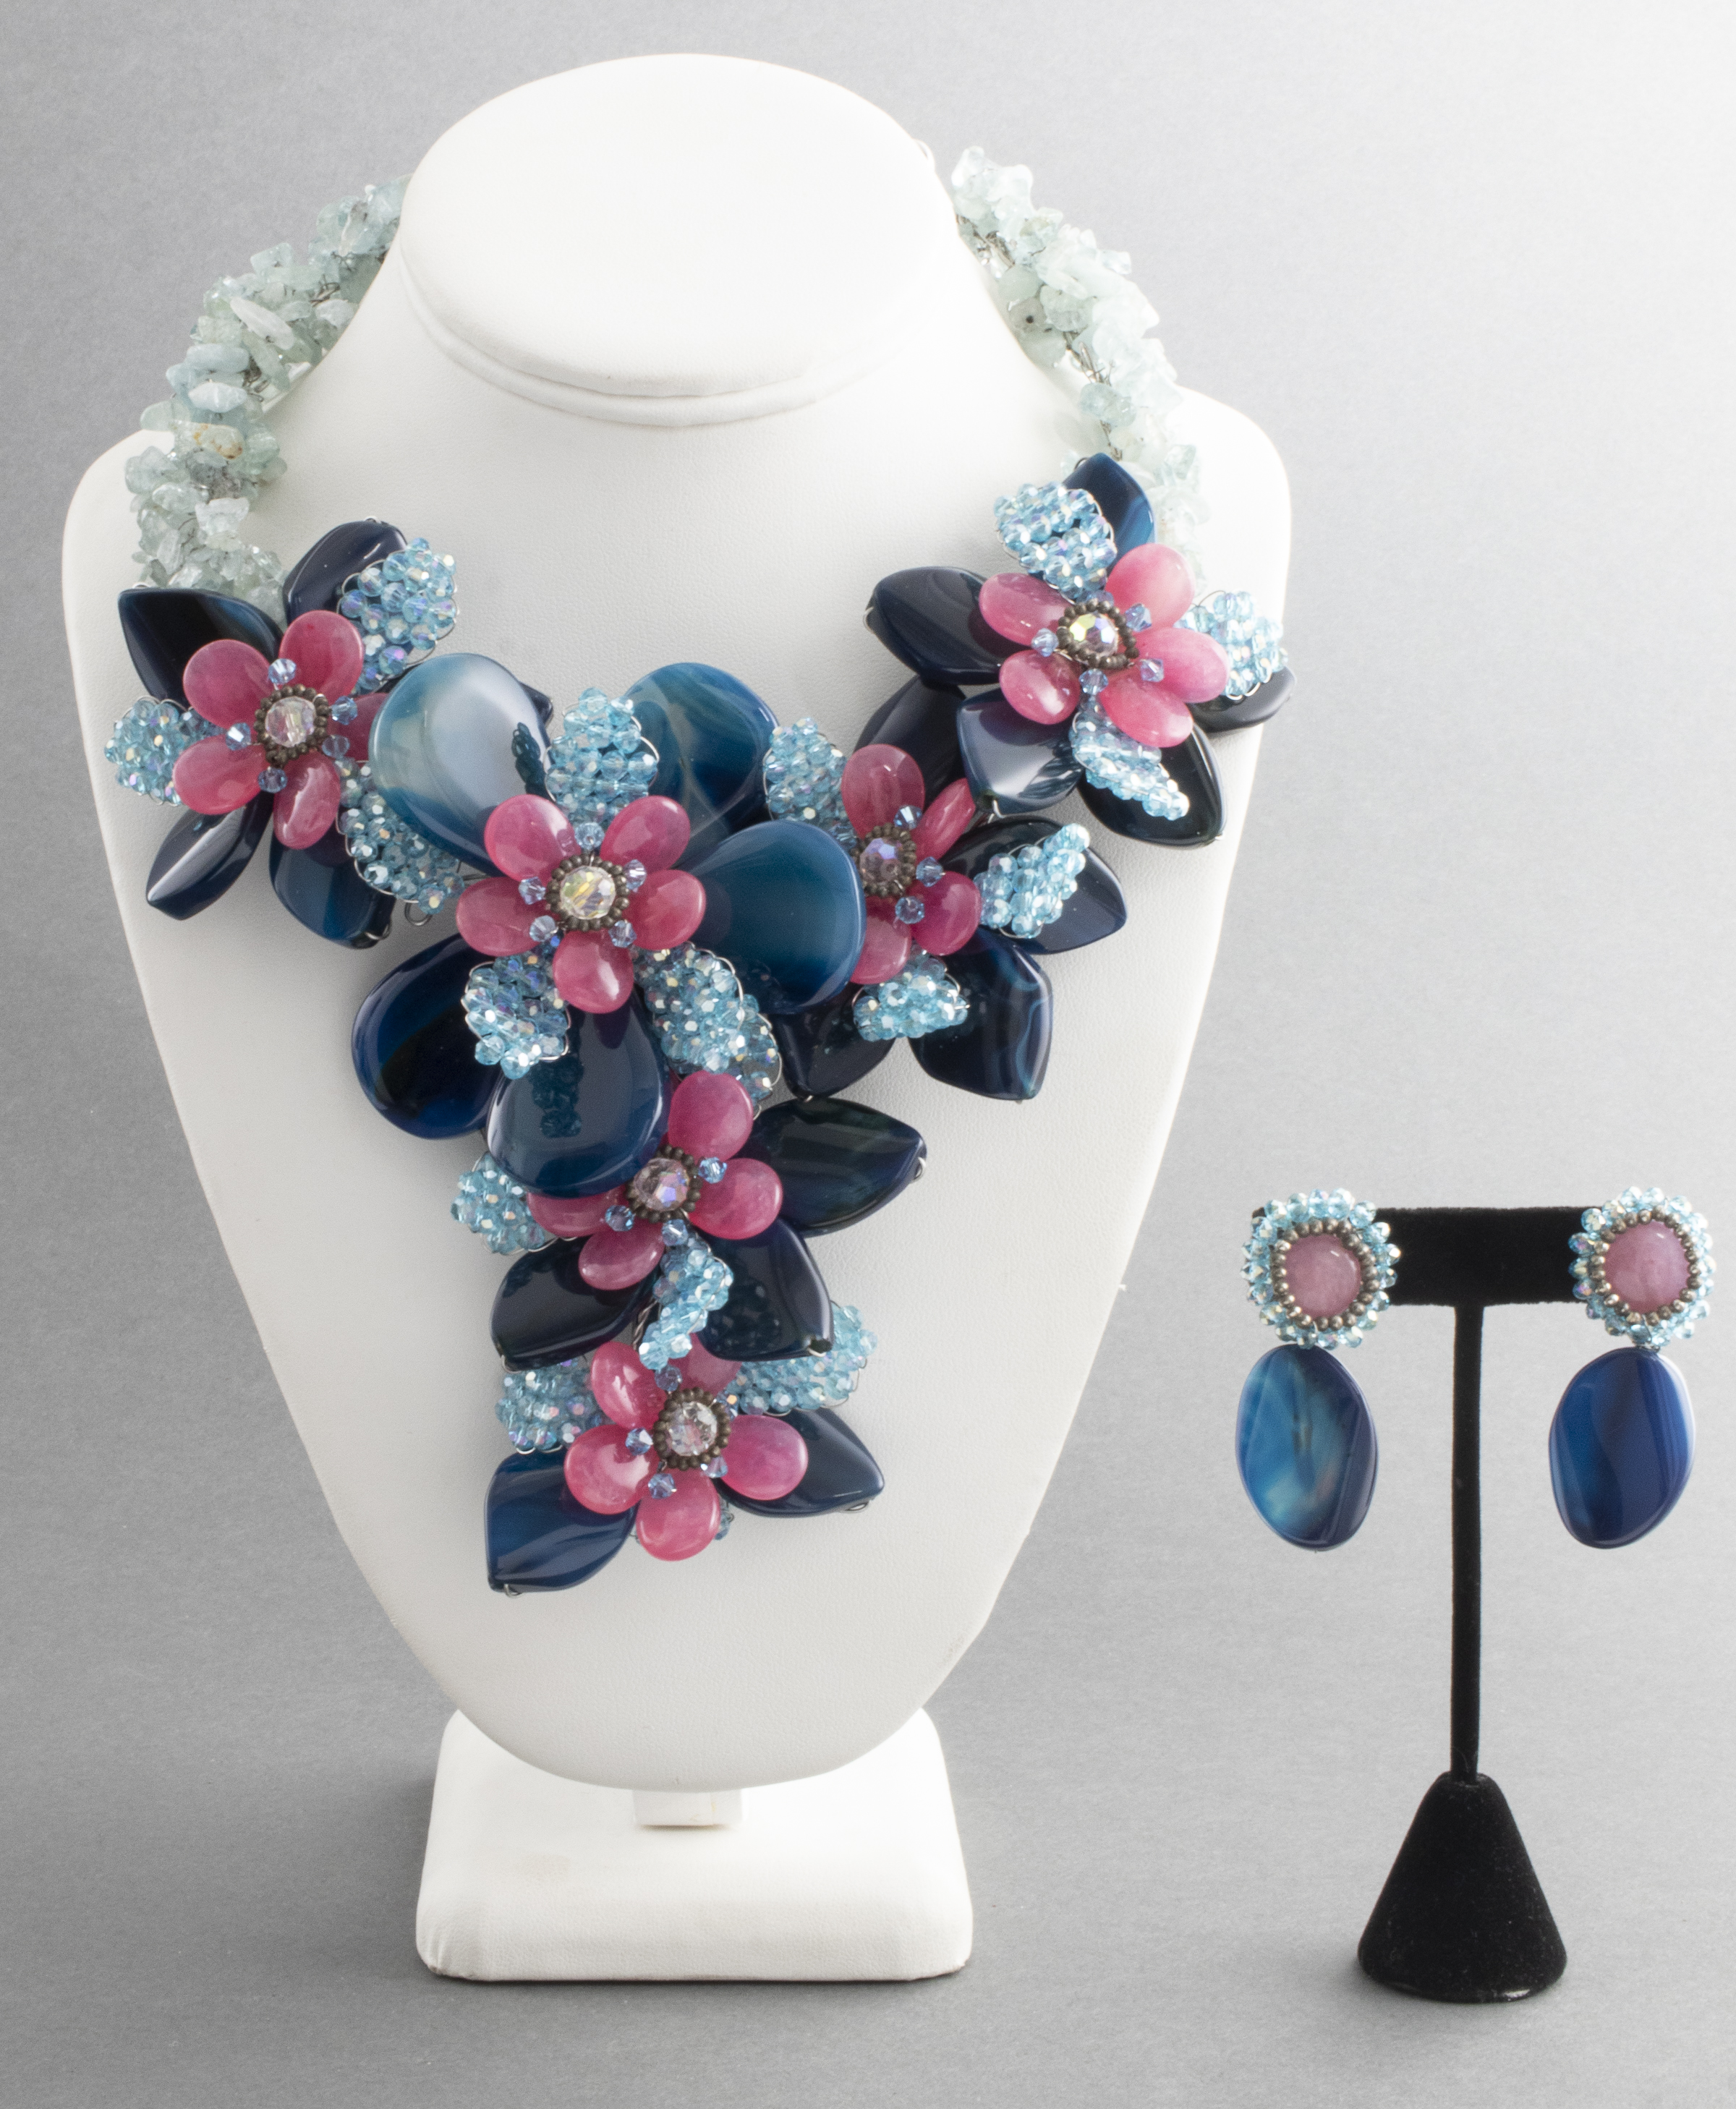 VILAIWAN FLORAL STONE AND BEAD NECKLACE